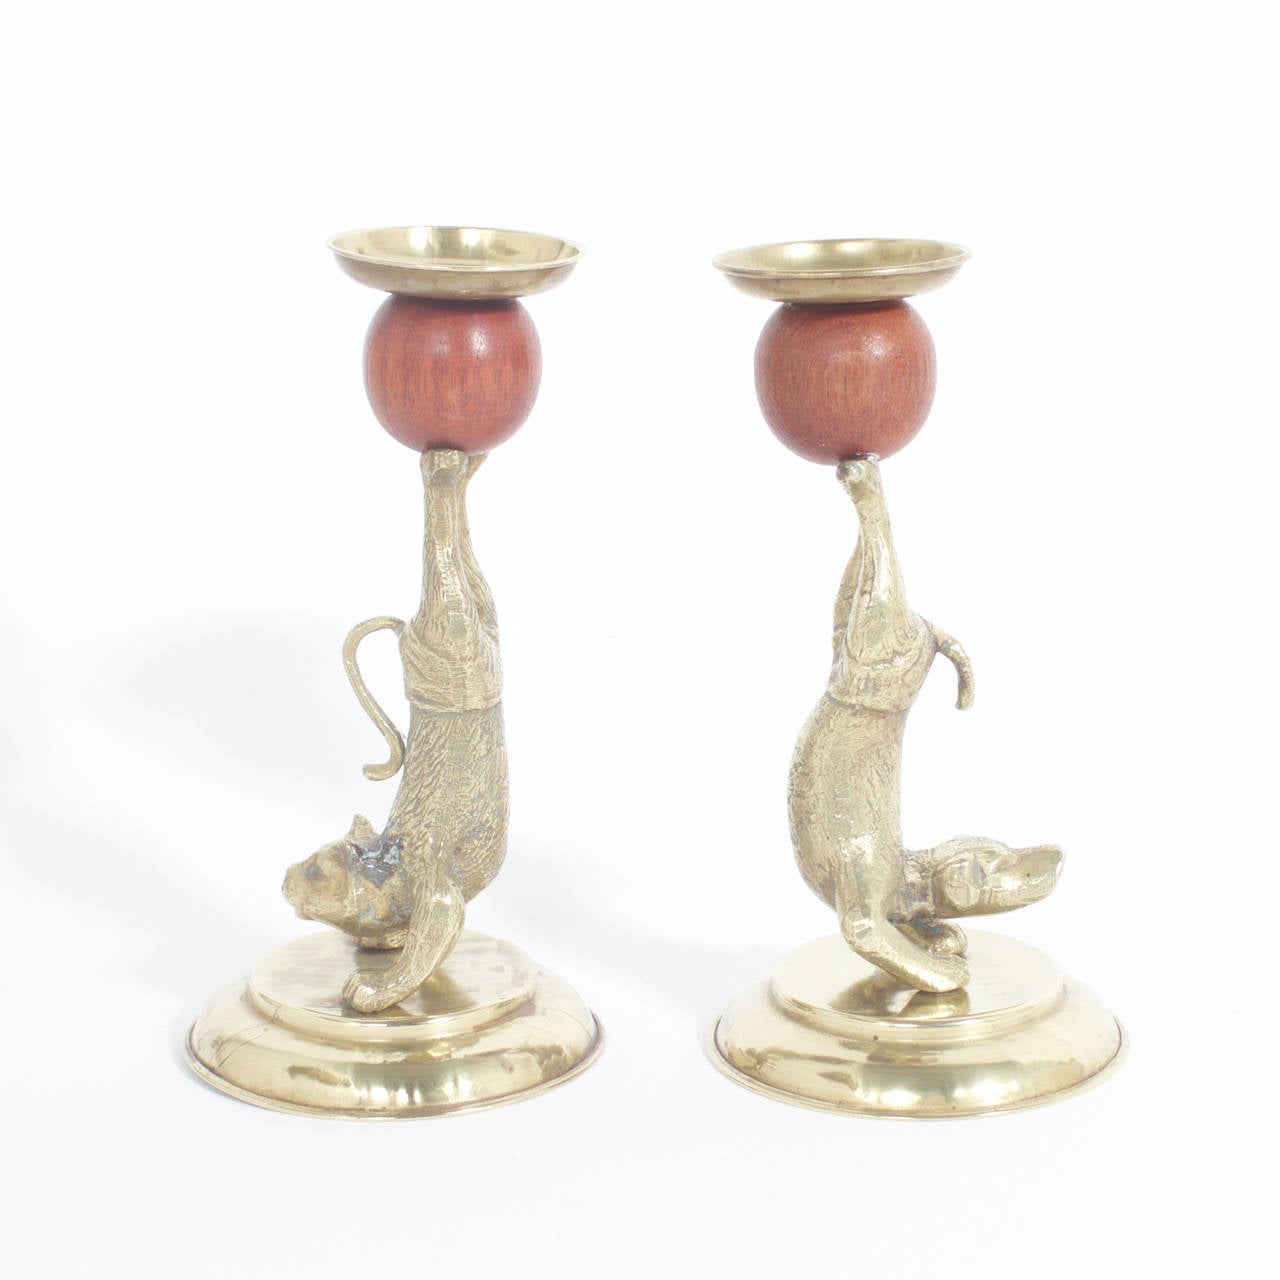 Arthur Court Mid Century Brass figurative candle sticks depicting a dog and a cat in swimming trunks while in a circus pose and balancing a wooden ball on their feet. Signed Arthur Court designs 1977 on the bottom. Newly Polished
